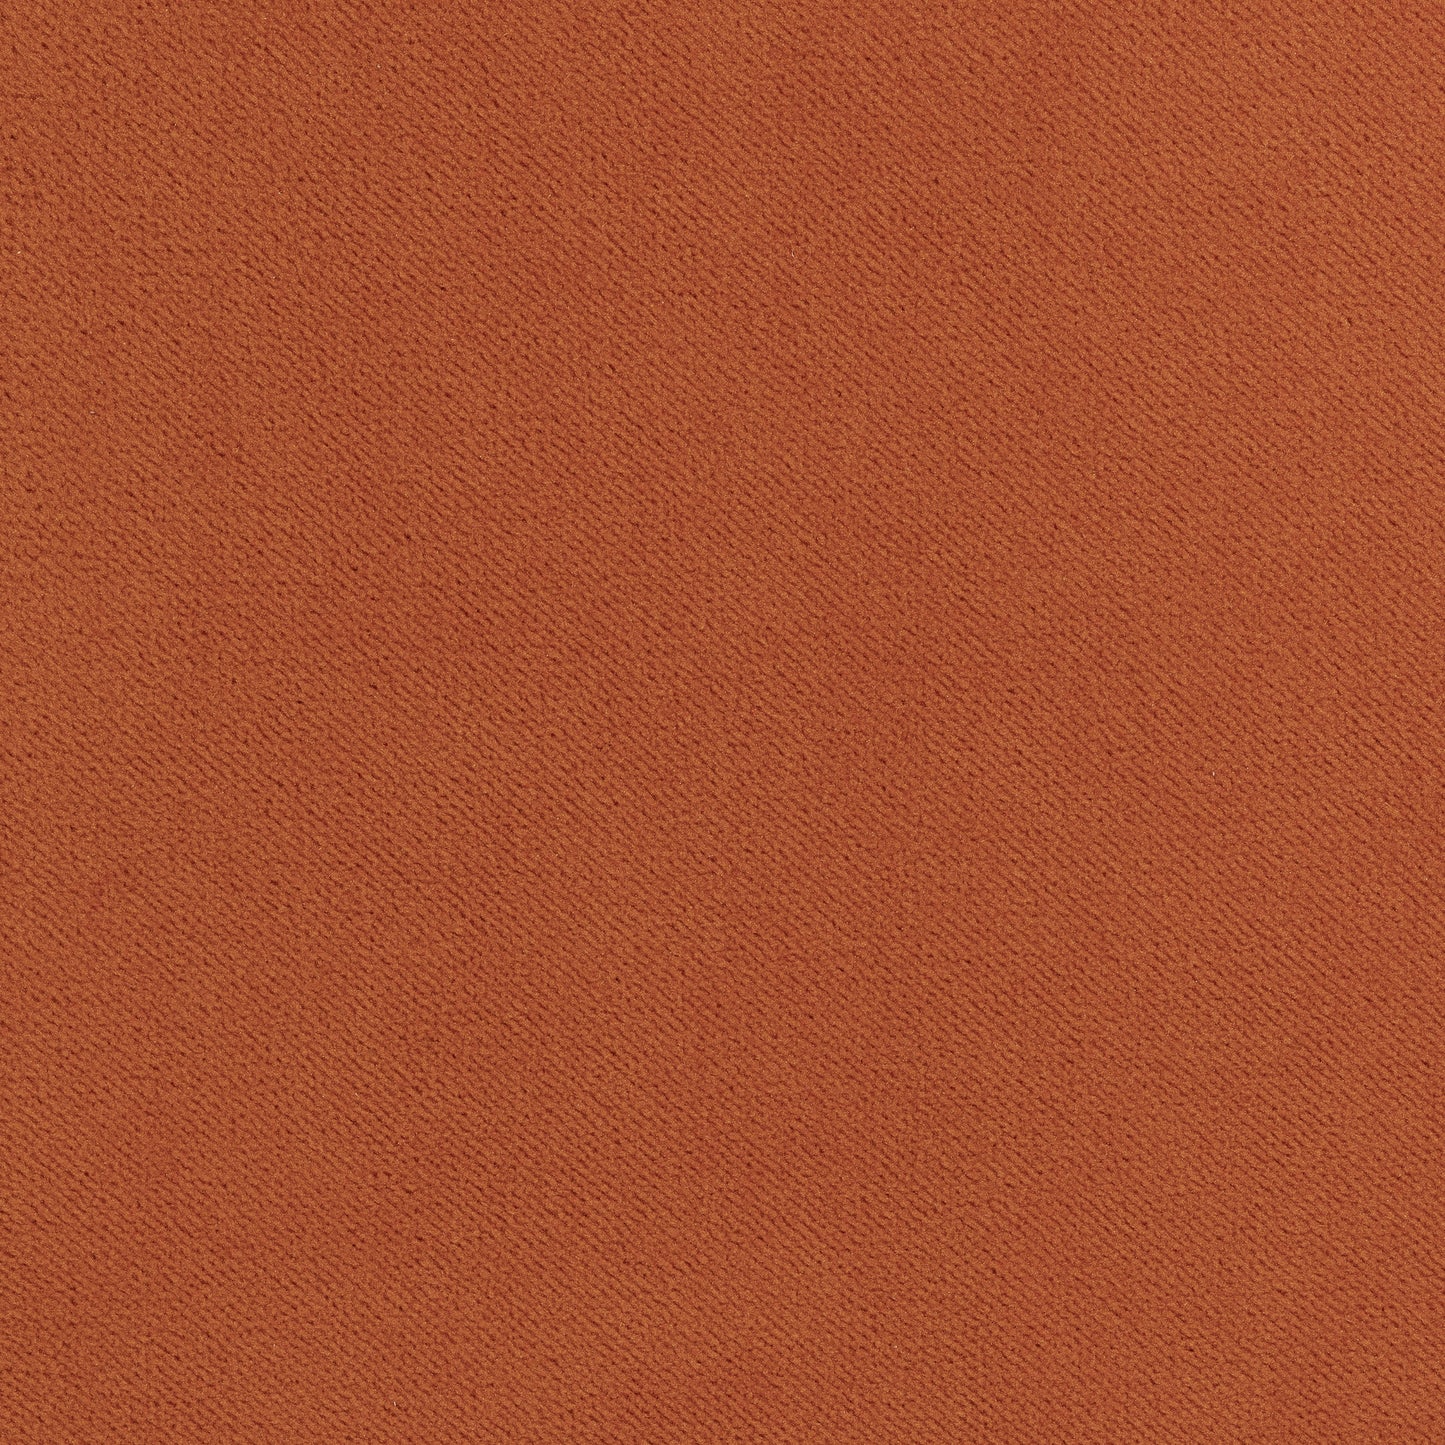 Purchase Thibaut Fabric Product W7203 pattern name Club Velvet color Terra Cotta